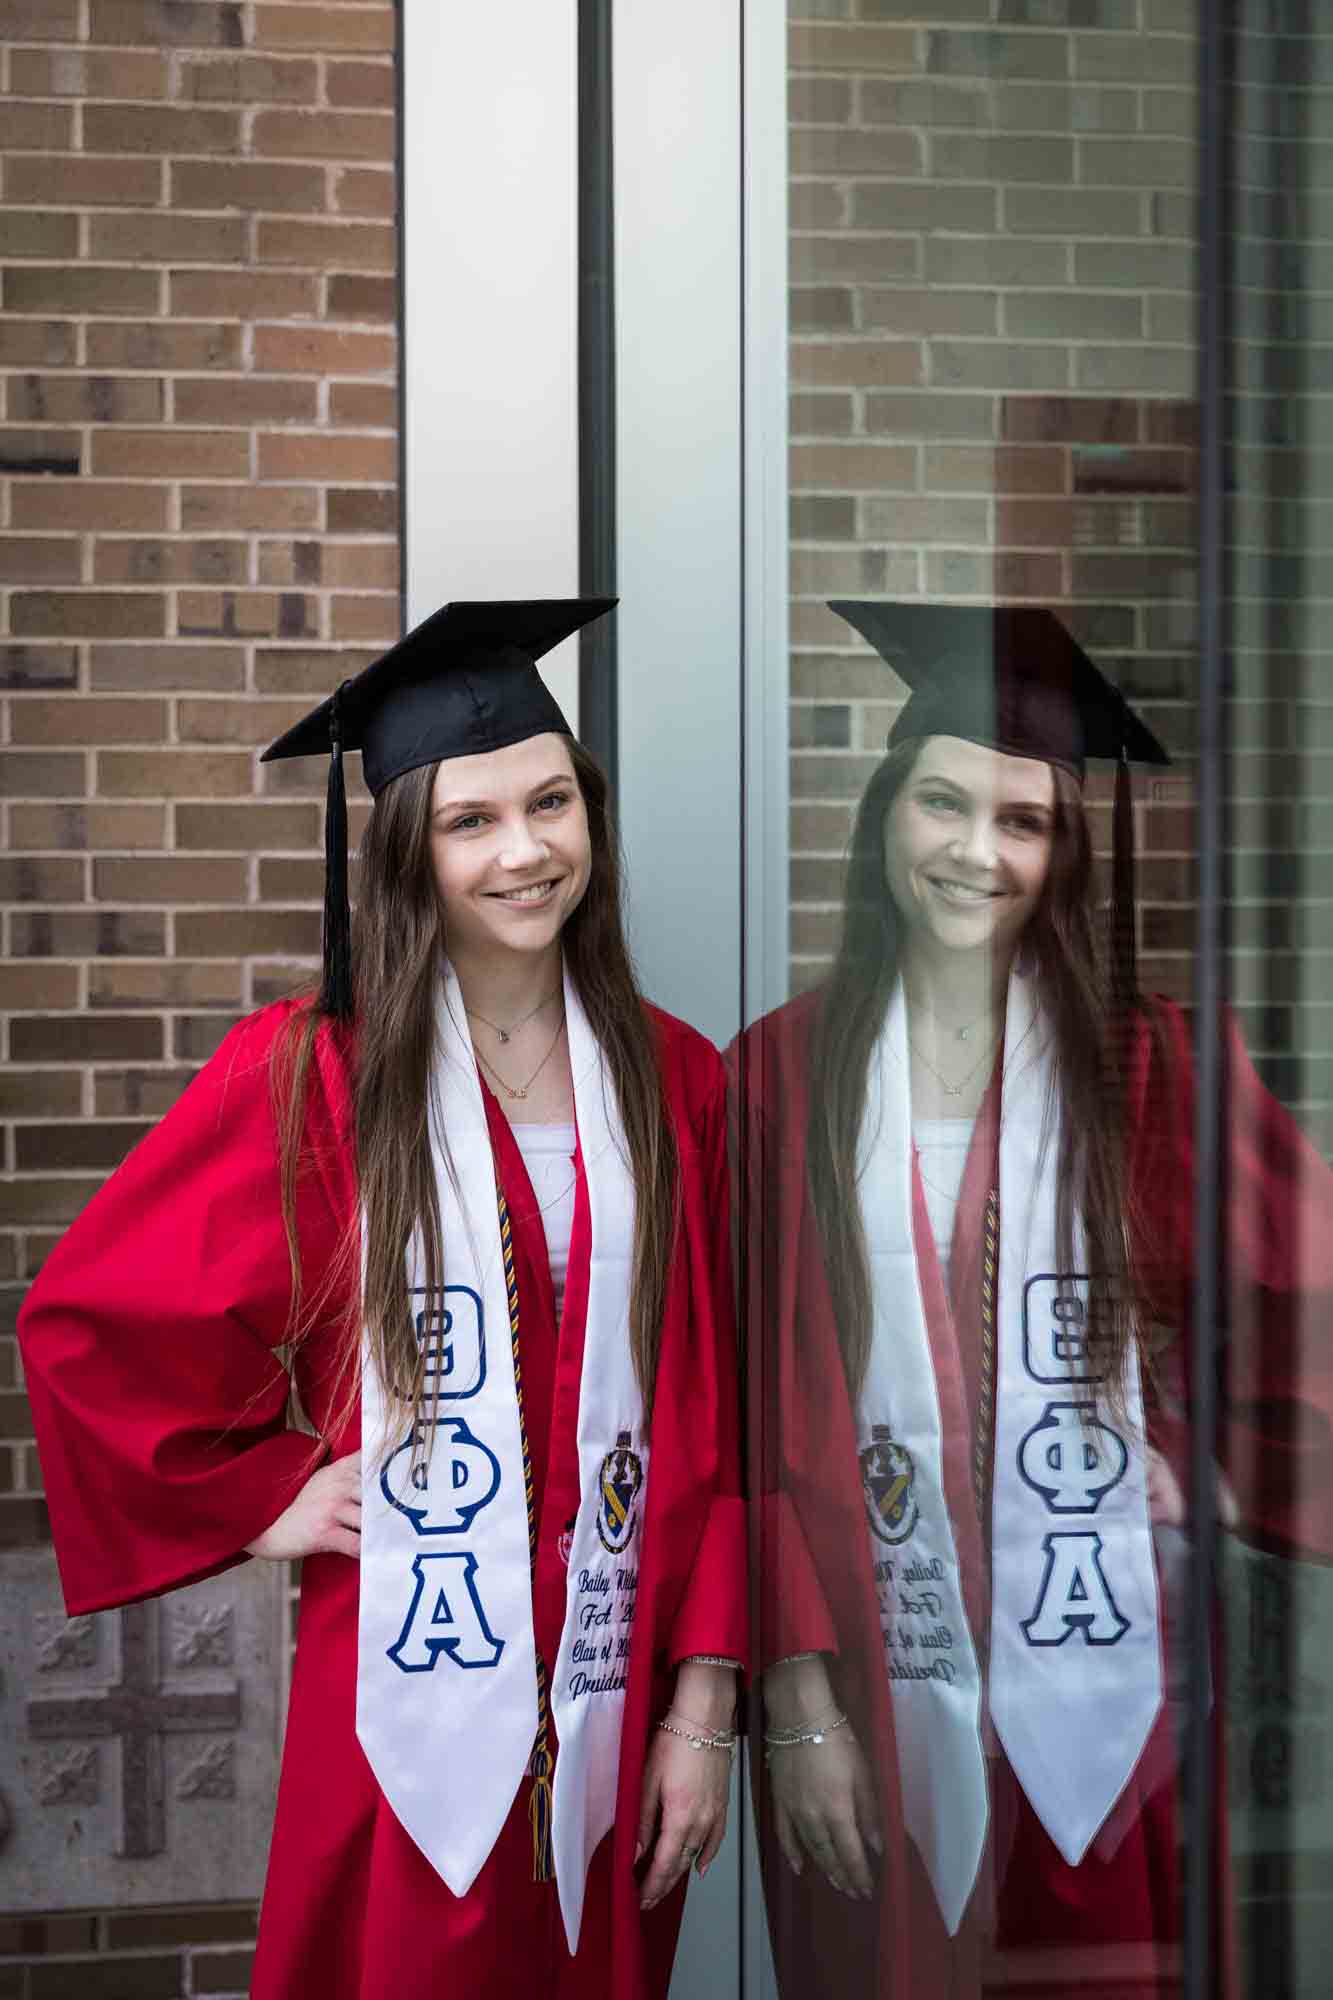 Female graduate wearing red robe, cap and white sash leaning against window with reflection during a St. John’s University graduate portrait session